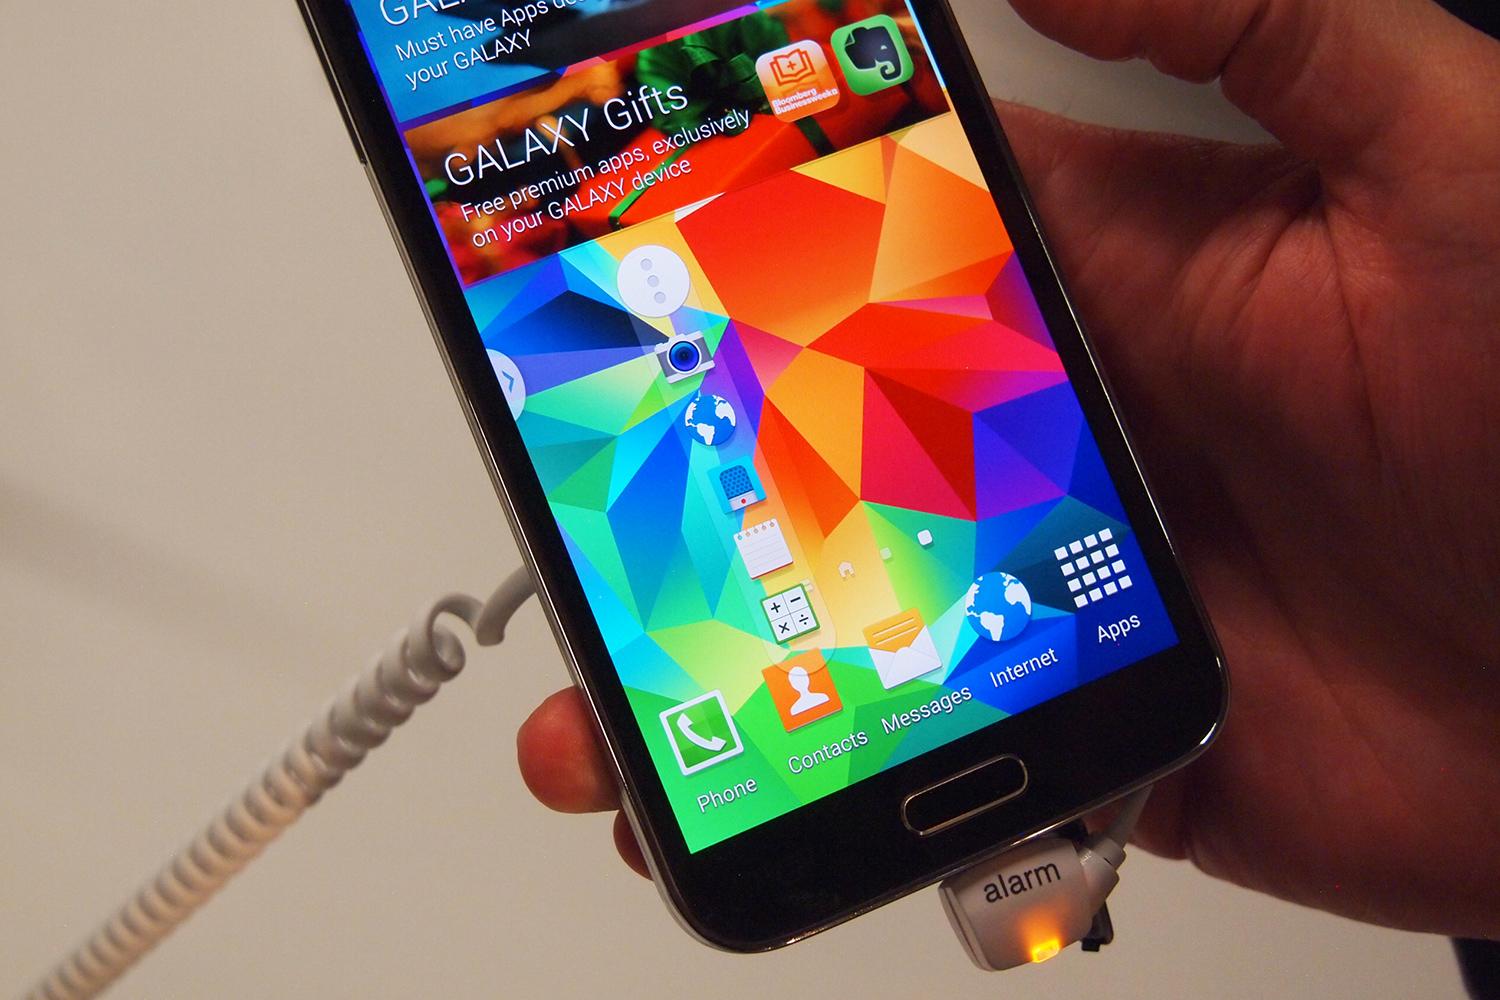 galaxy s5 specs release date price samsung gifts macro